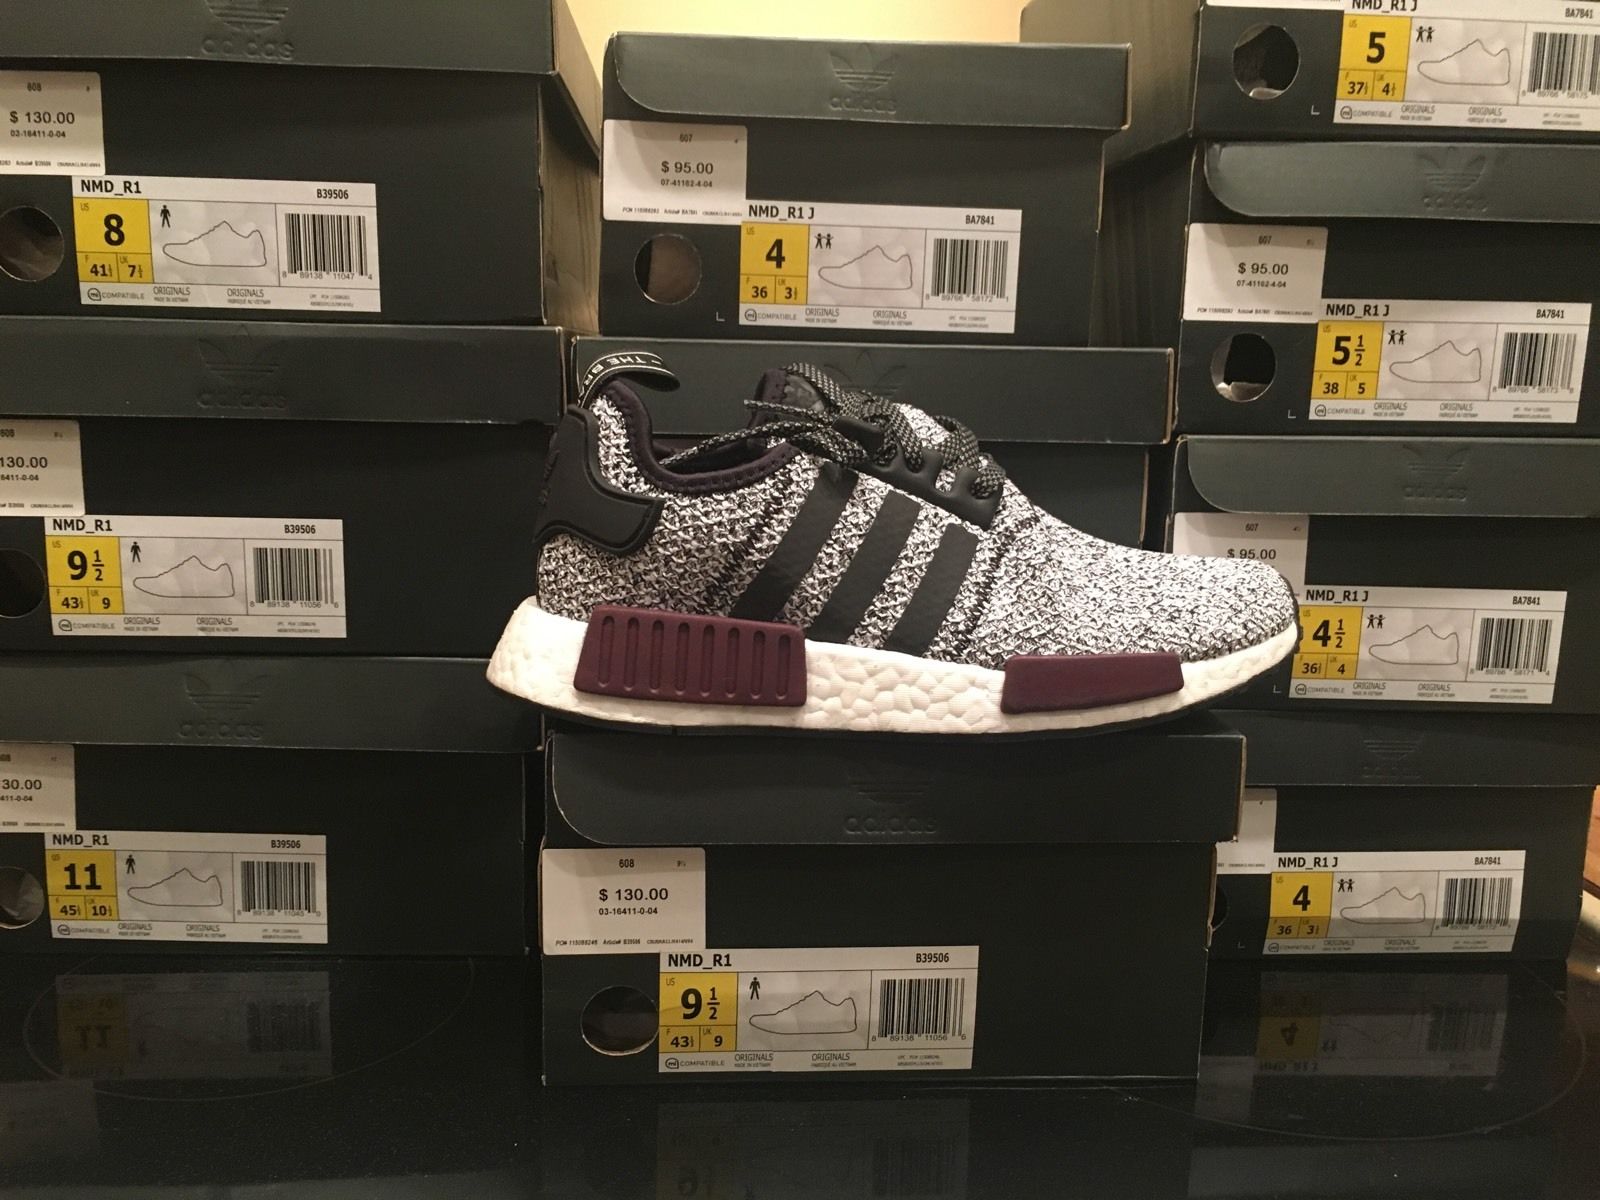 nmd r1 size 4